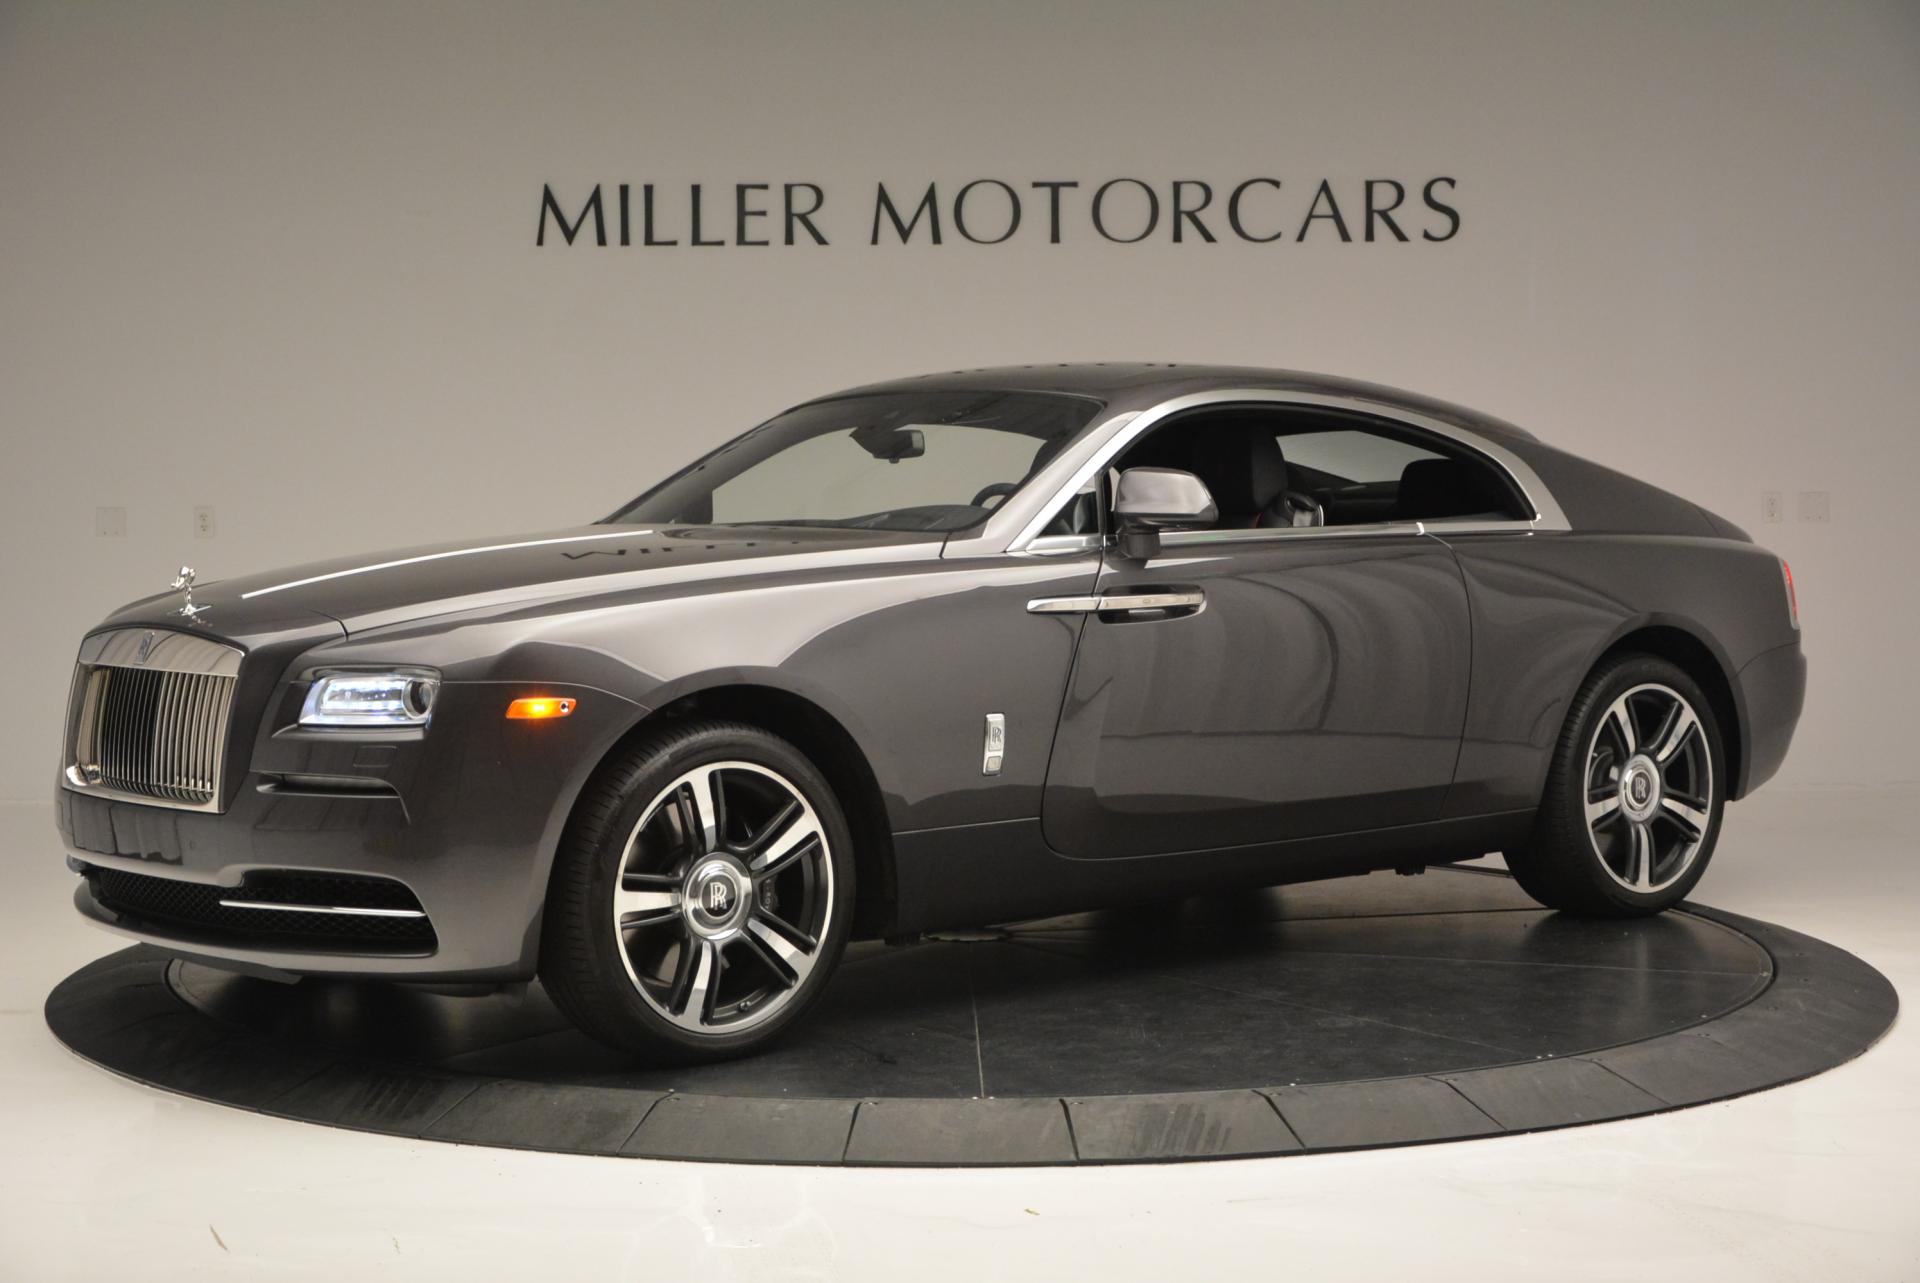 New 2016 Rolls-Royce Wraith for sale Sold at Rolls-Royce Motor Cars Greenwich in Greenwich CT 06830 1